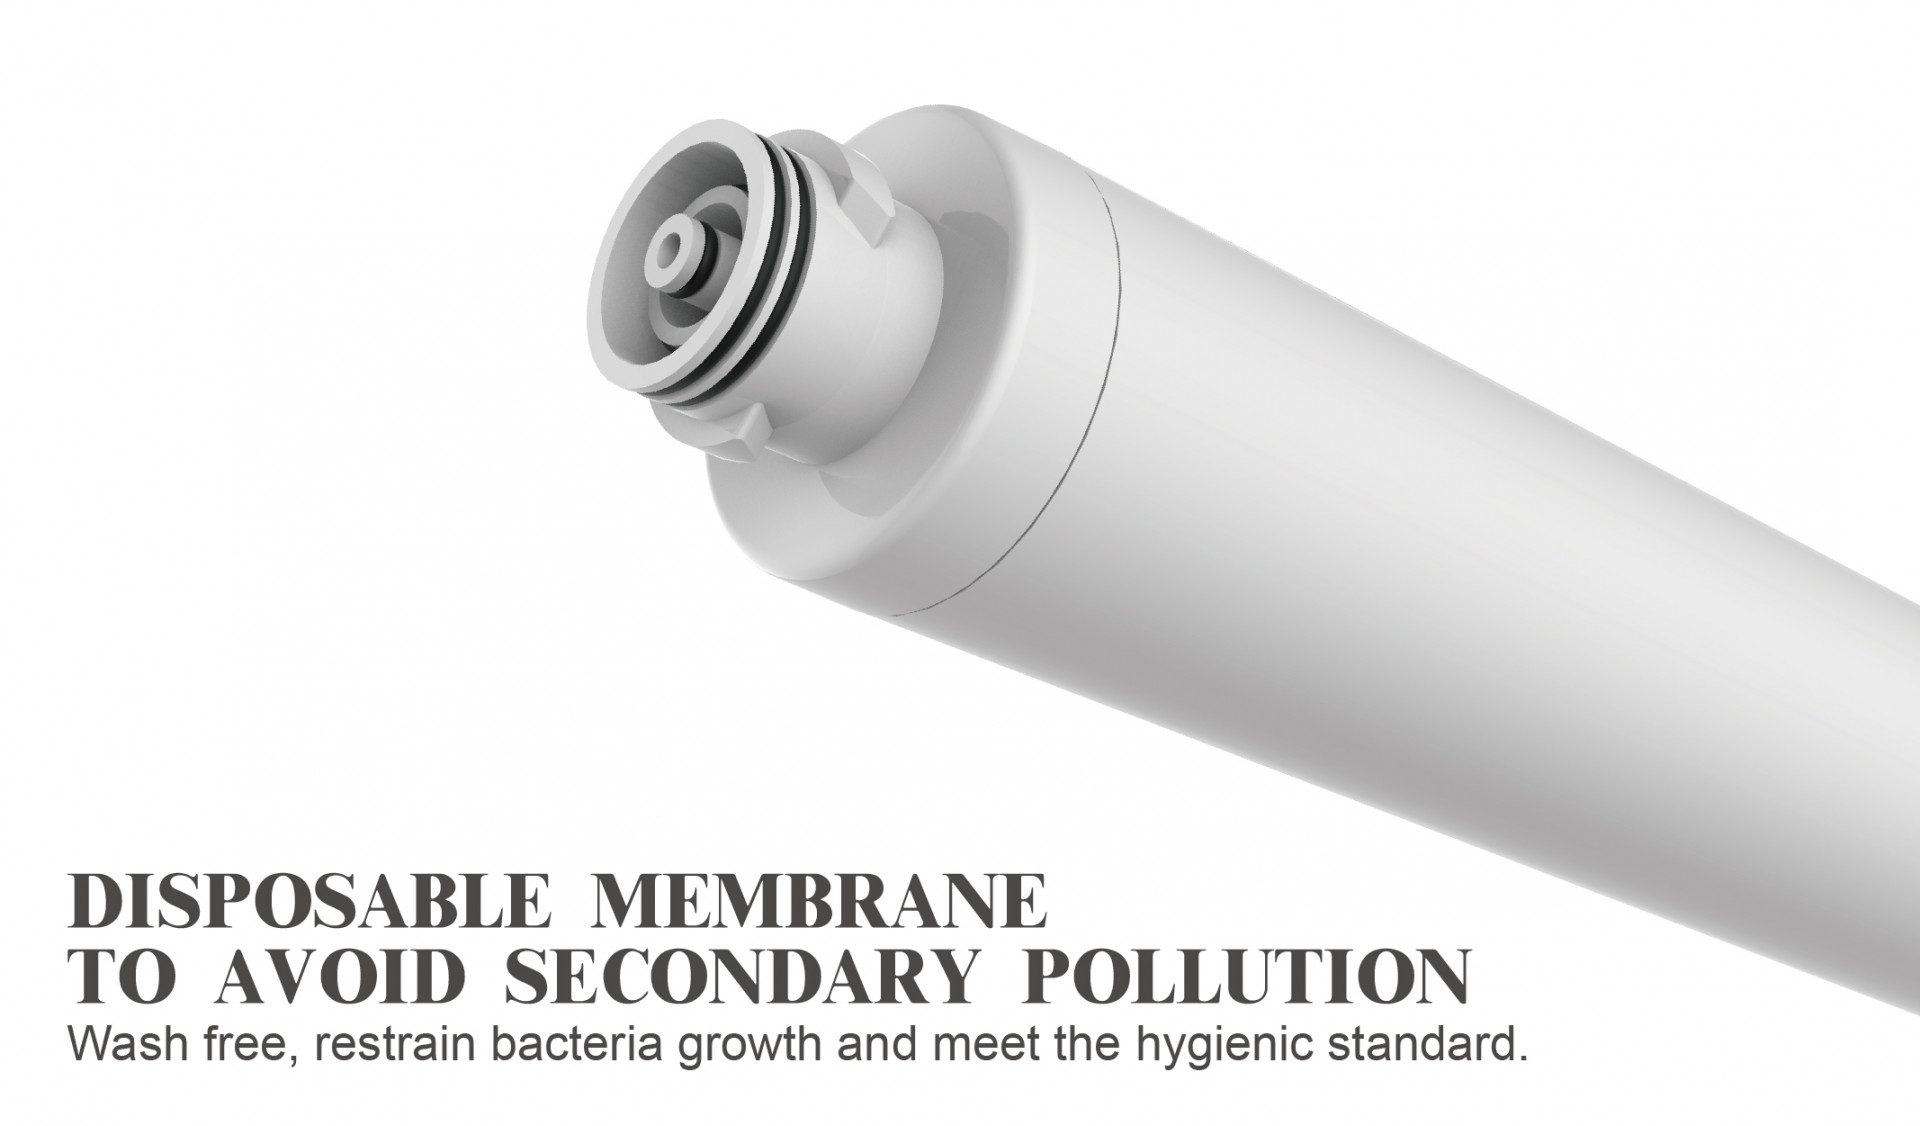 FILTER DISPOSABLE MEMBRANE TO AVOID SECONDARY POLLUTION